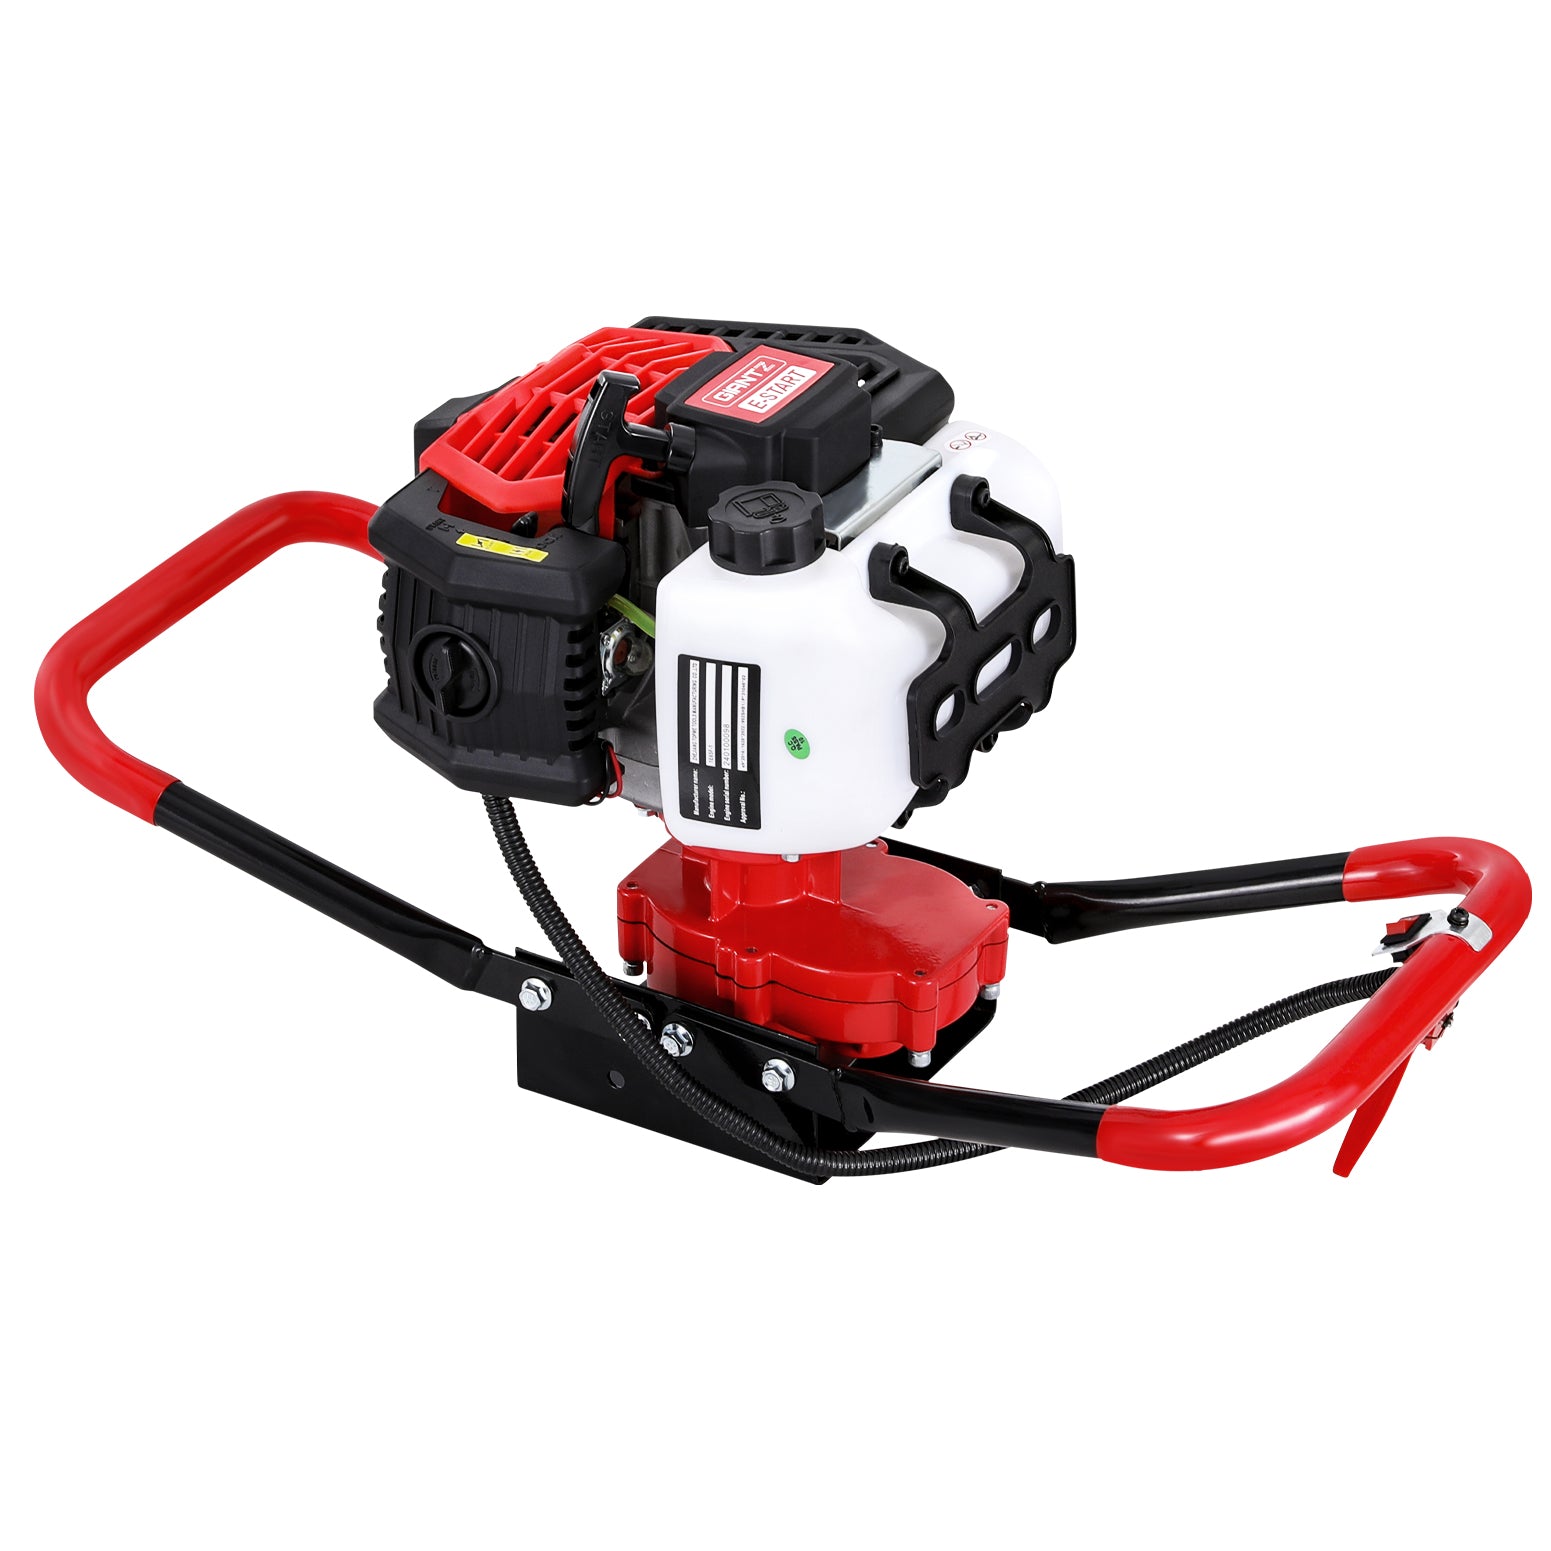 Giantz 65CC Post Hole Digger Motor Only Petrol Engine Red - SILBERSHELL